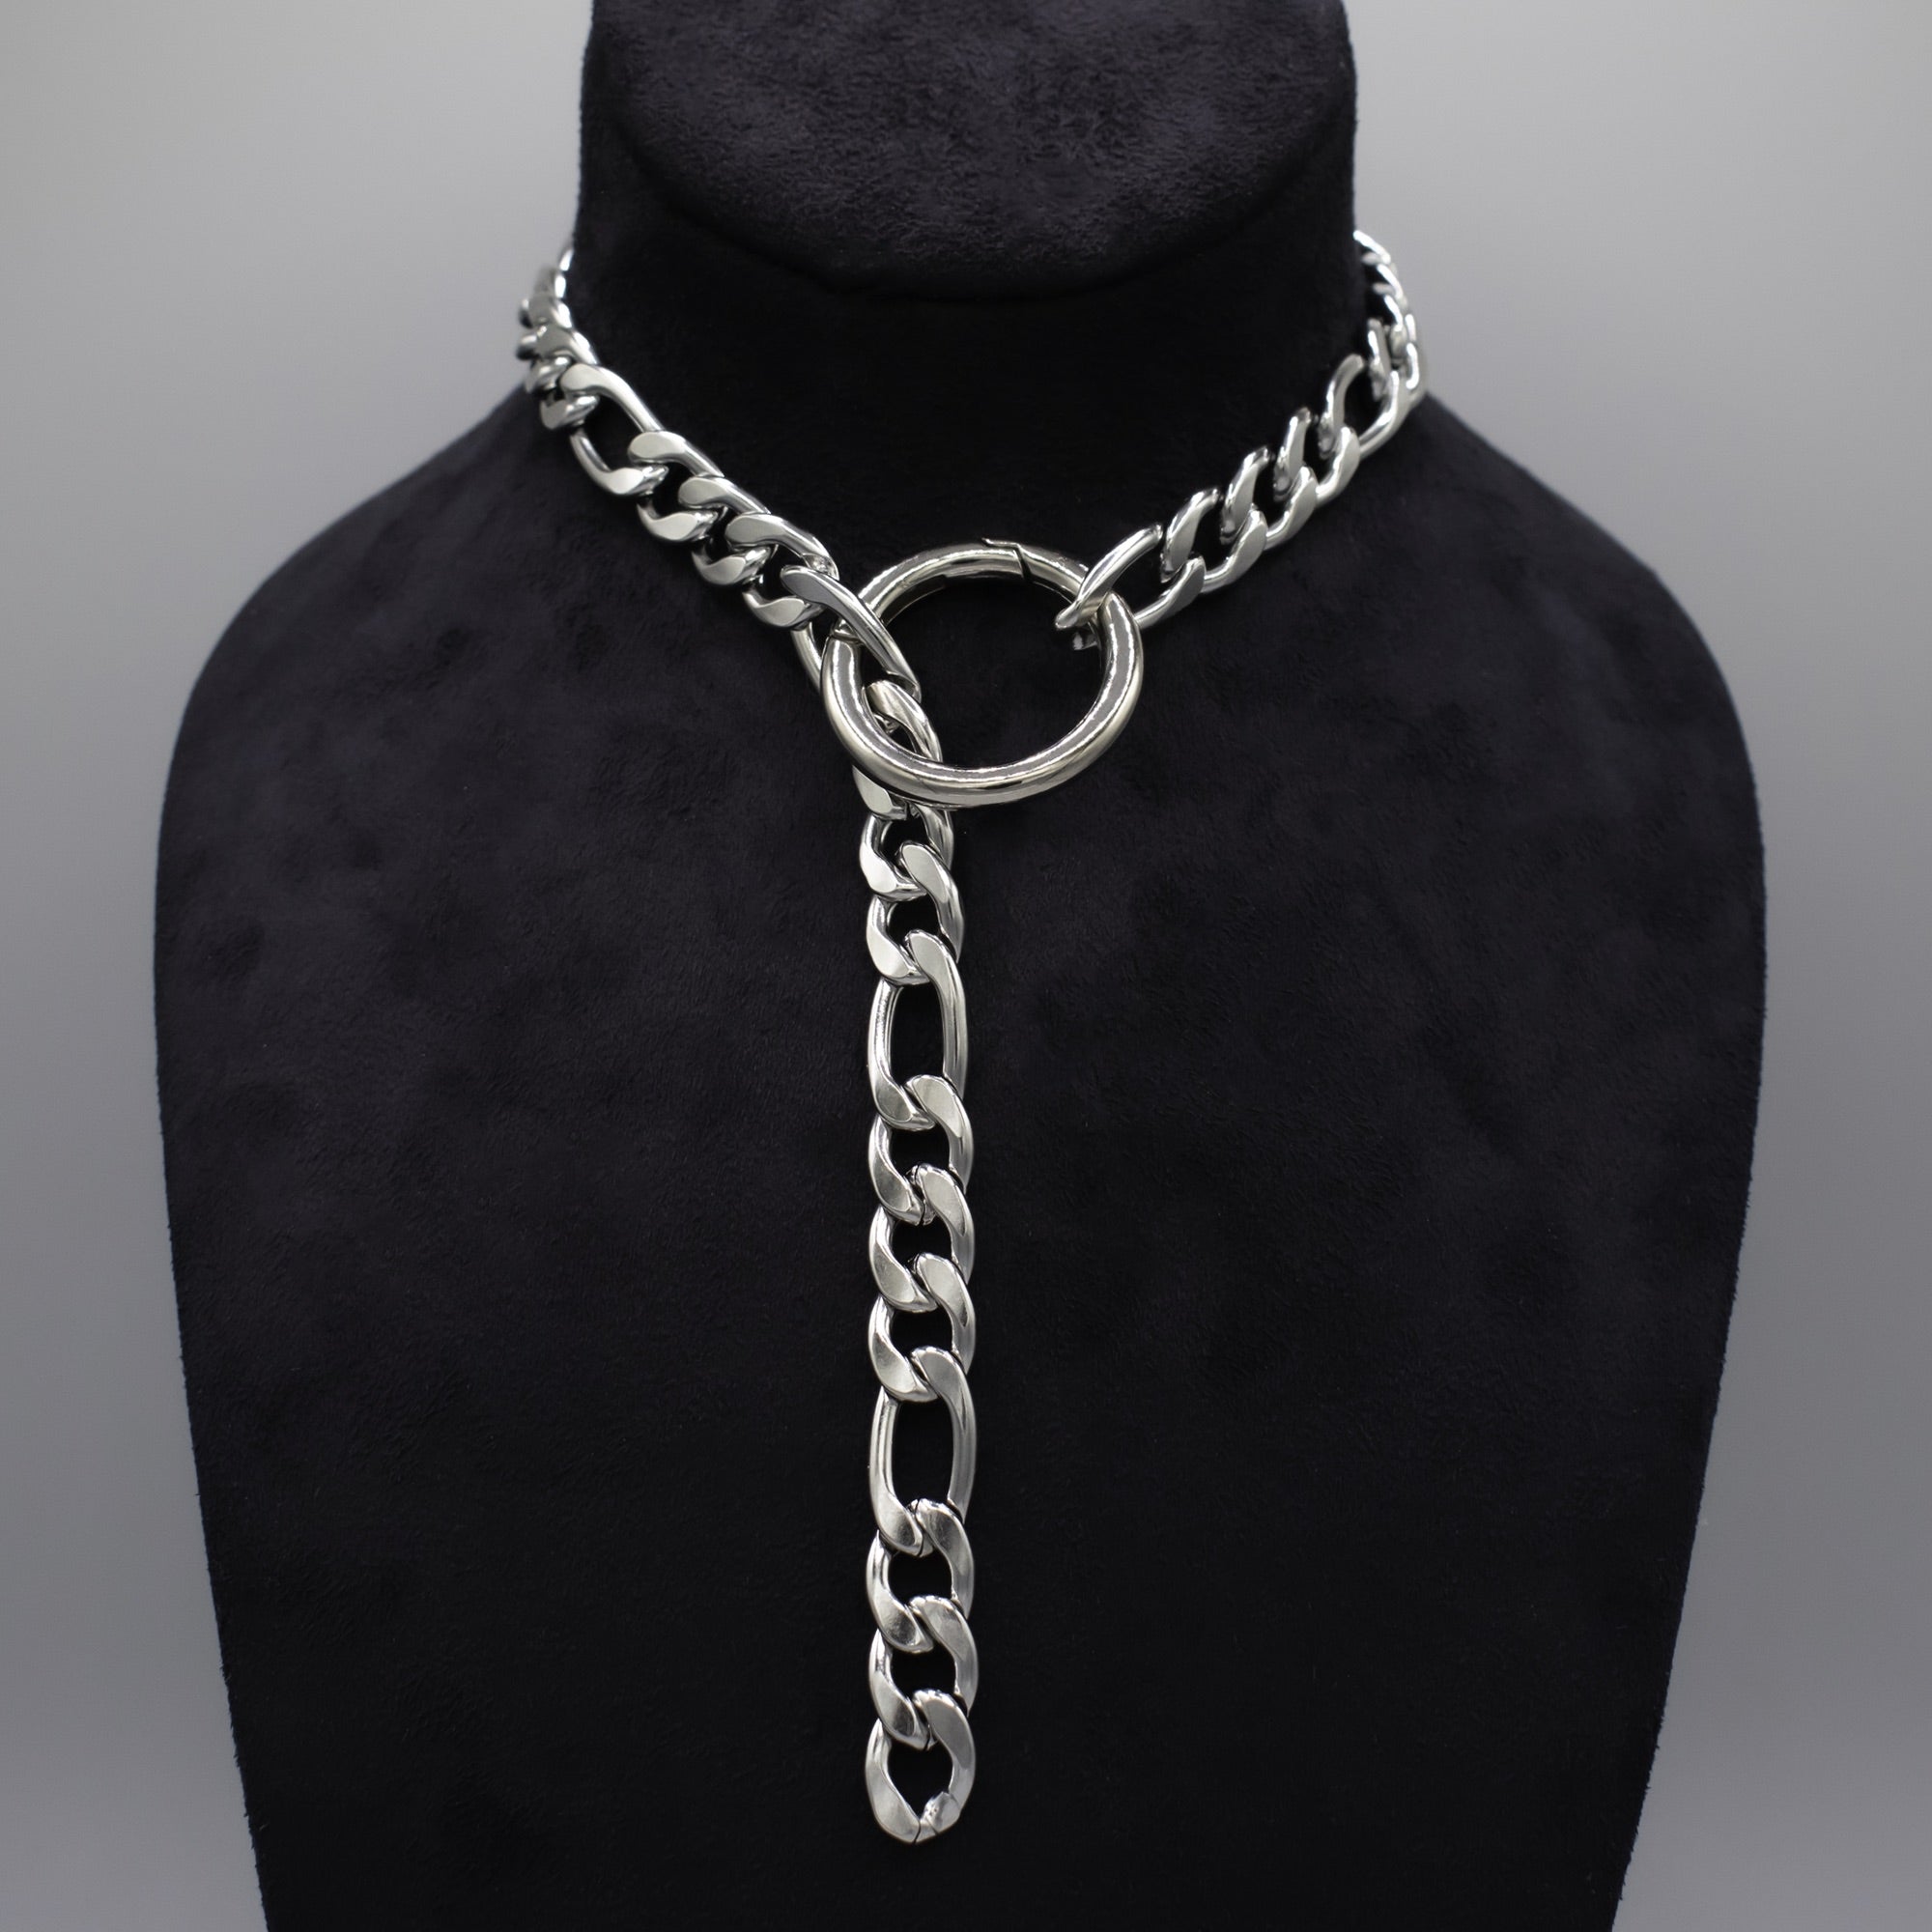 Thick figaro adjustable choker necklace